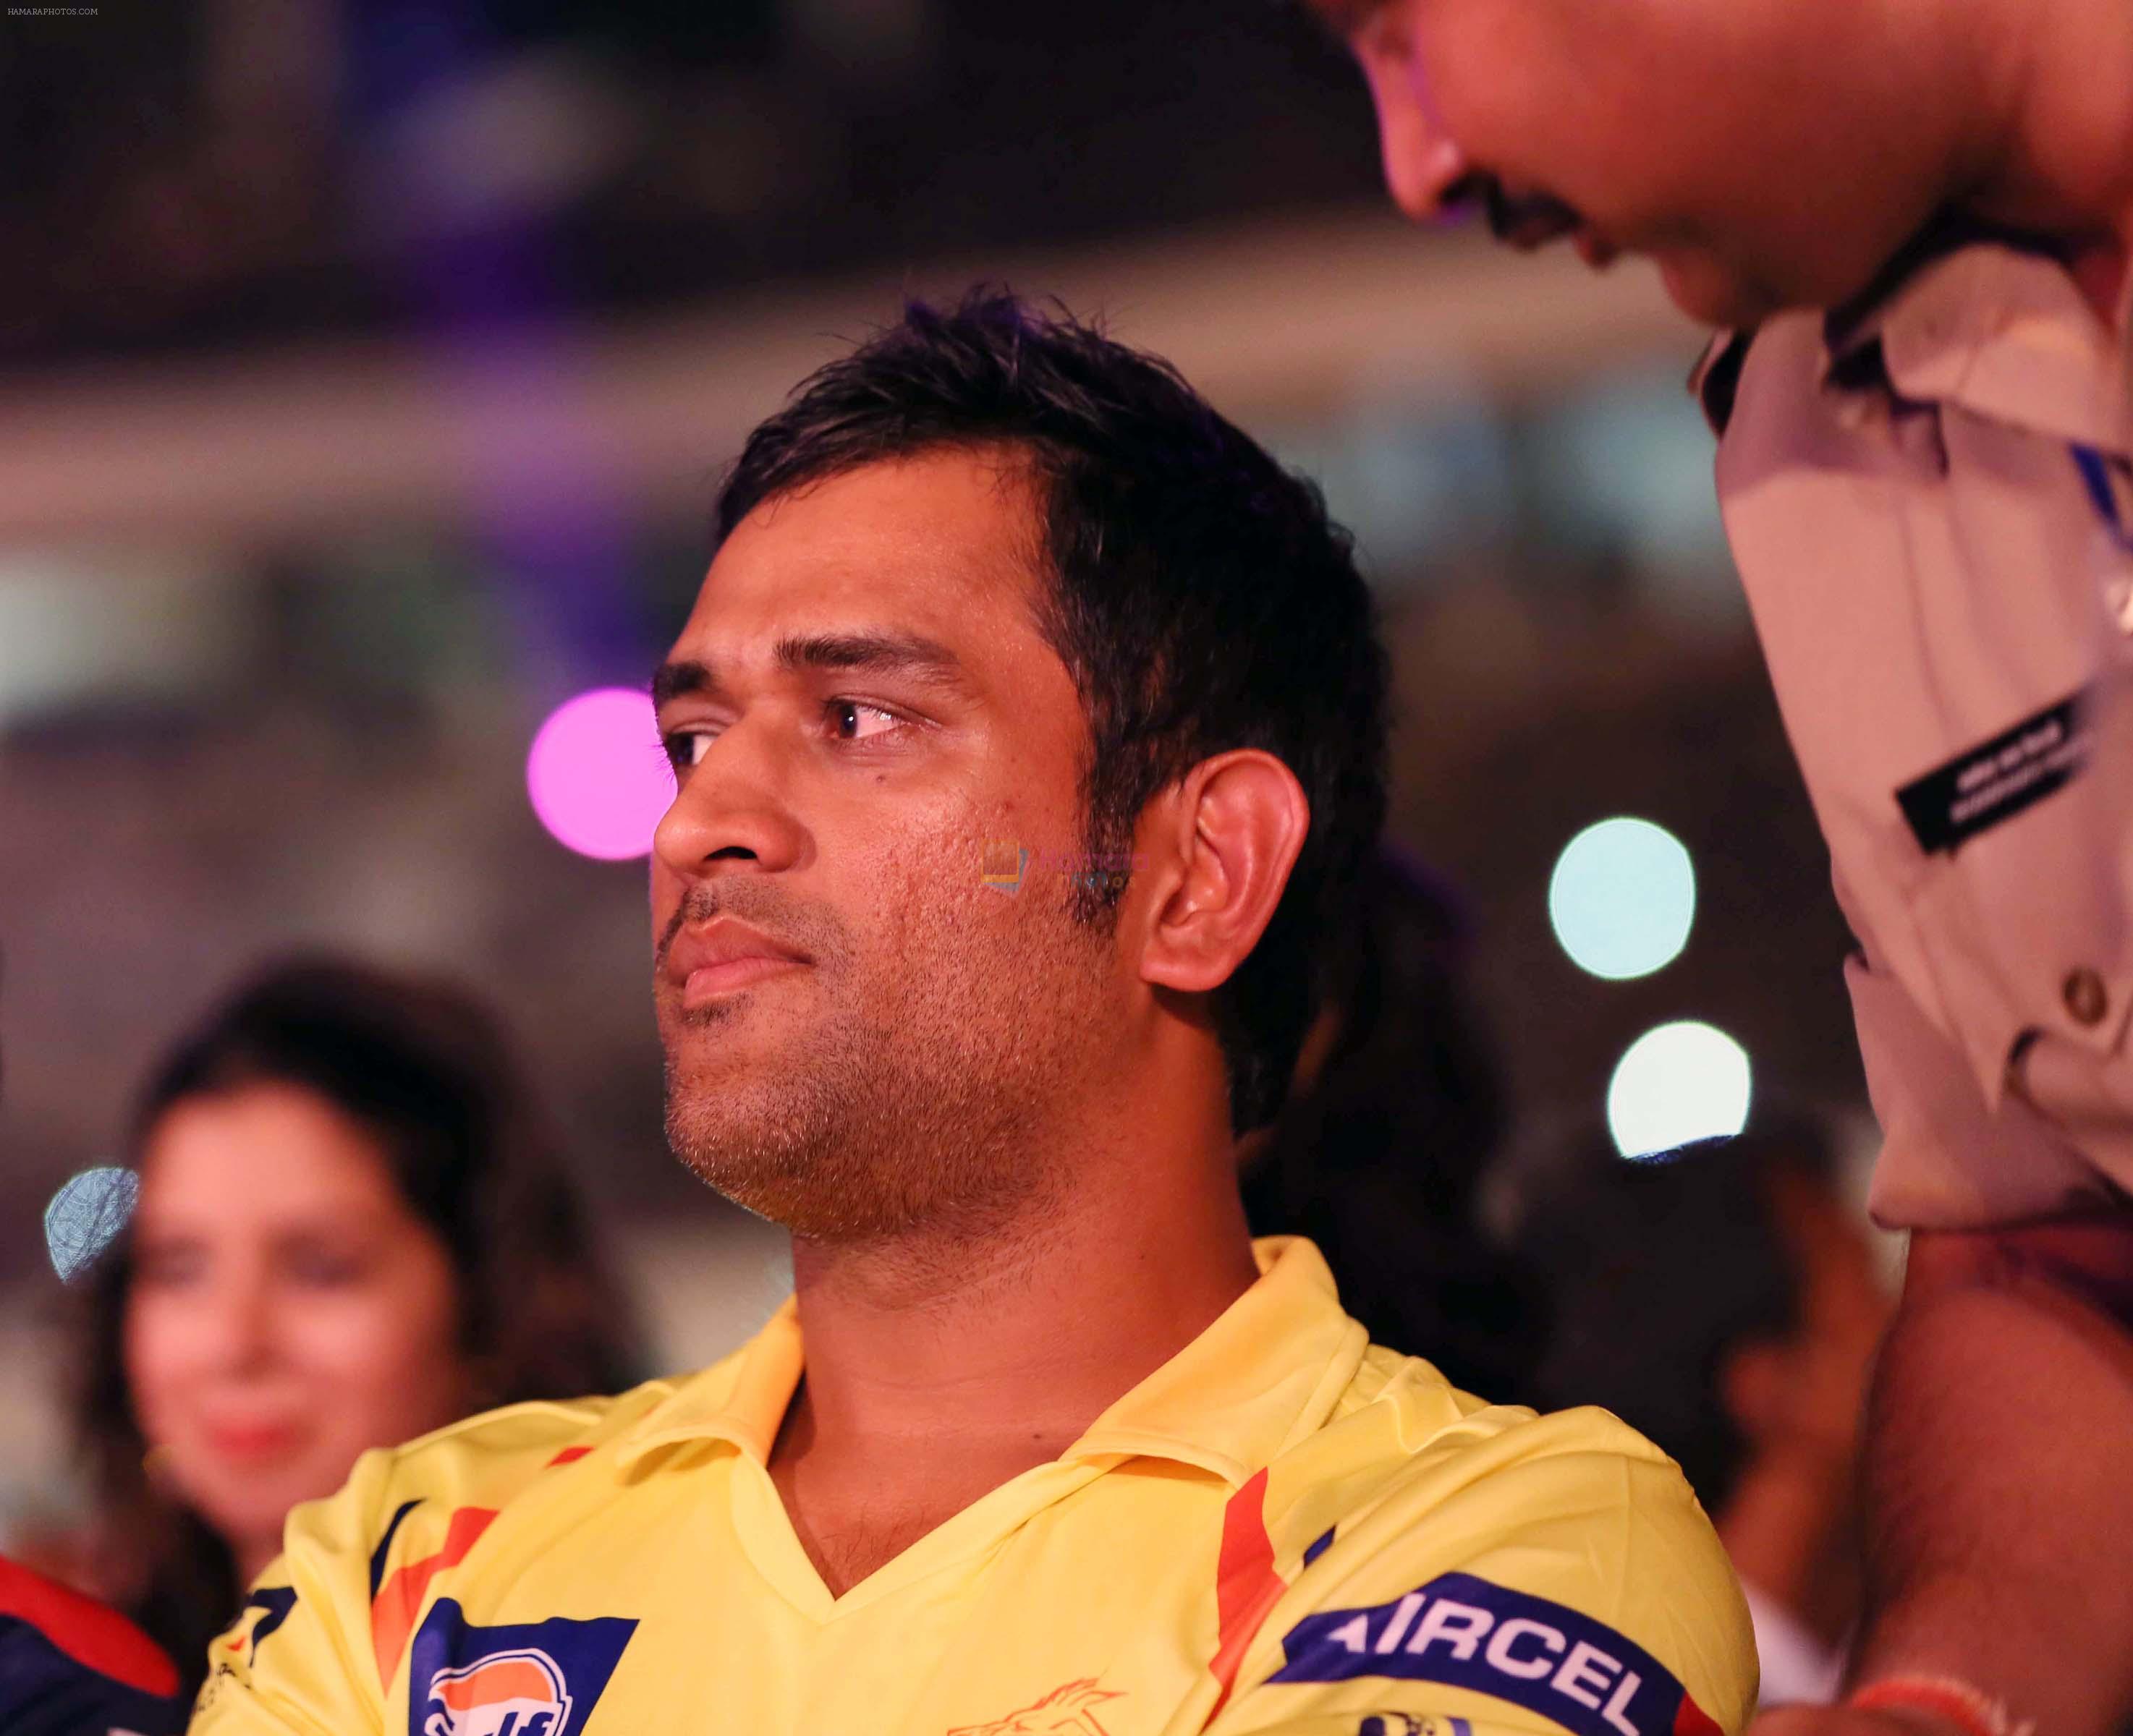 MS DHONI at IPL 6 opening ceremony in Kolkata on 2nd April 2012